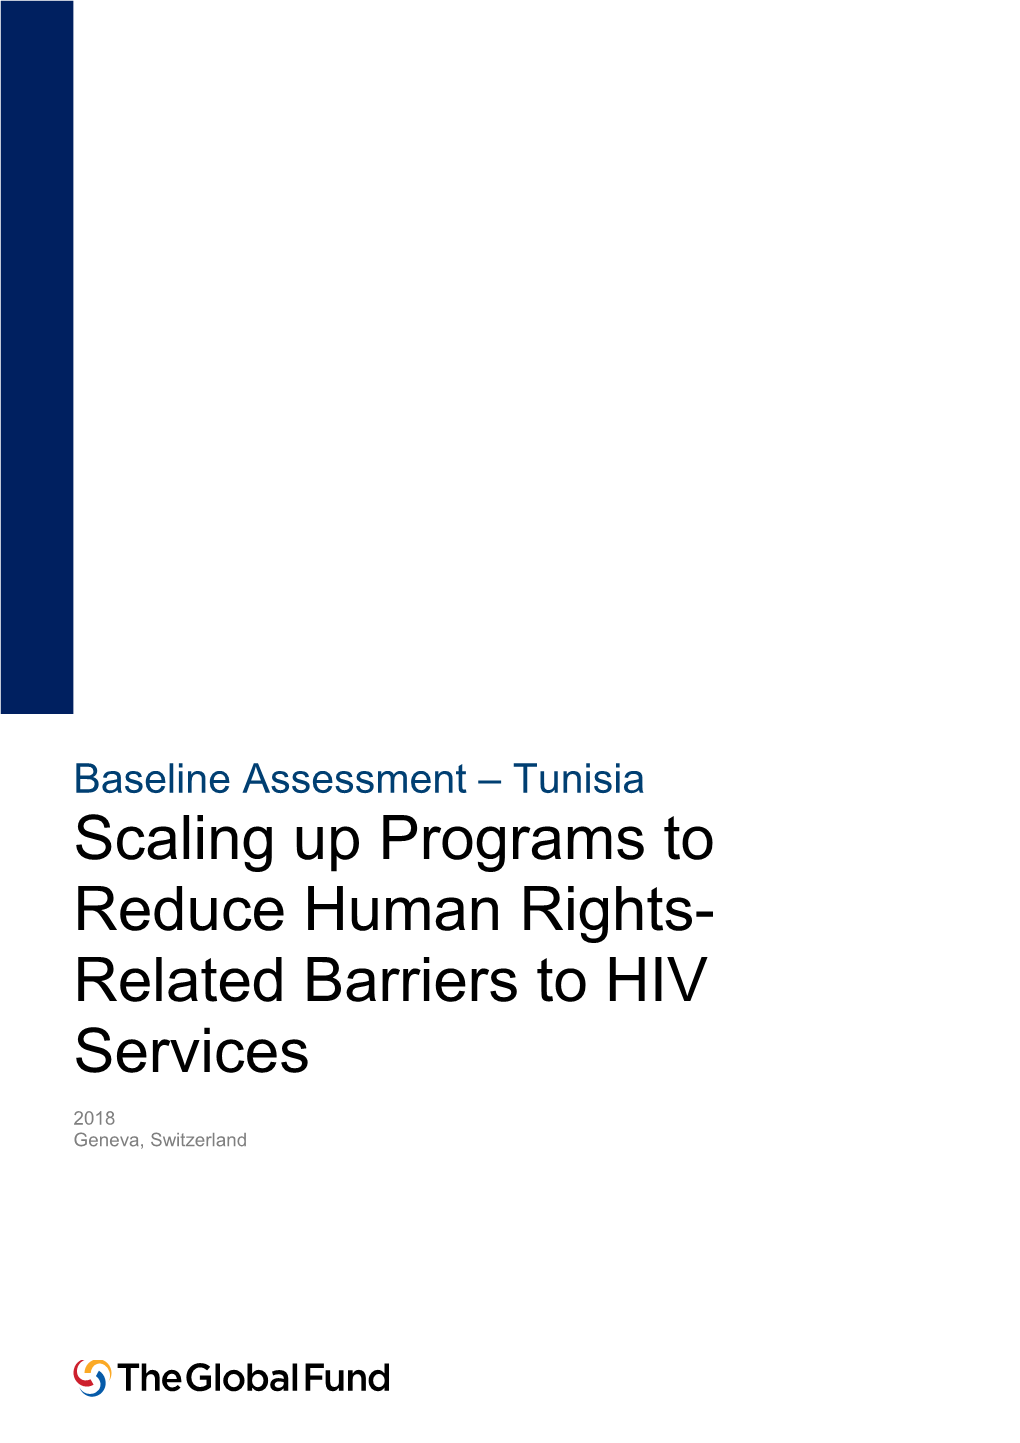 Related Barriers to HIV Services